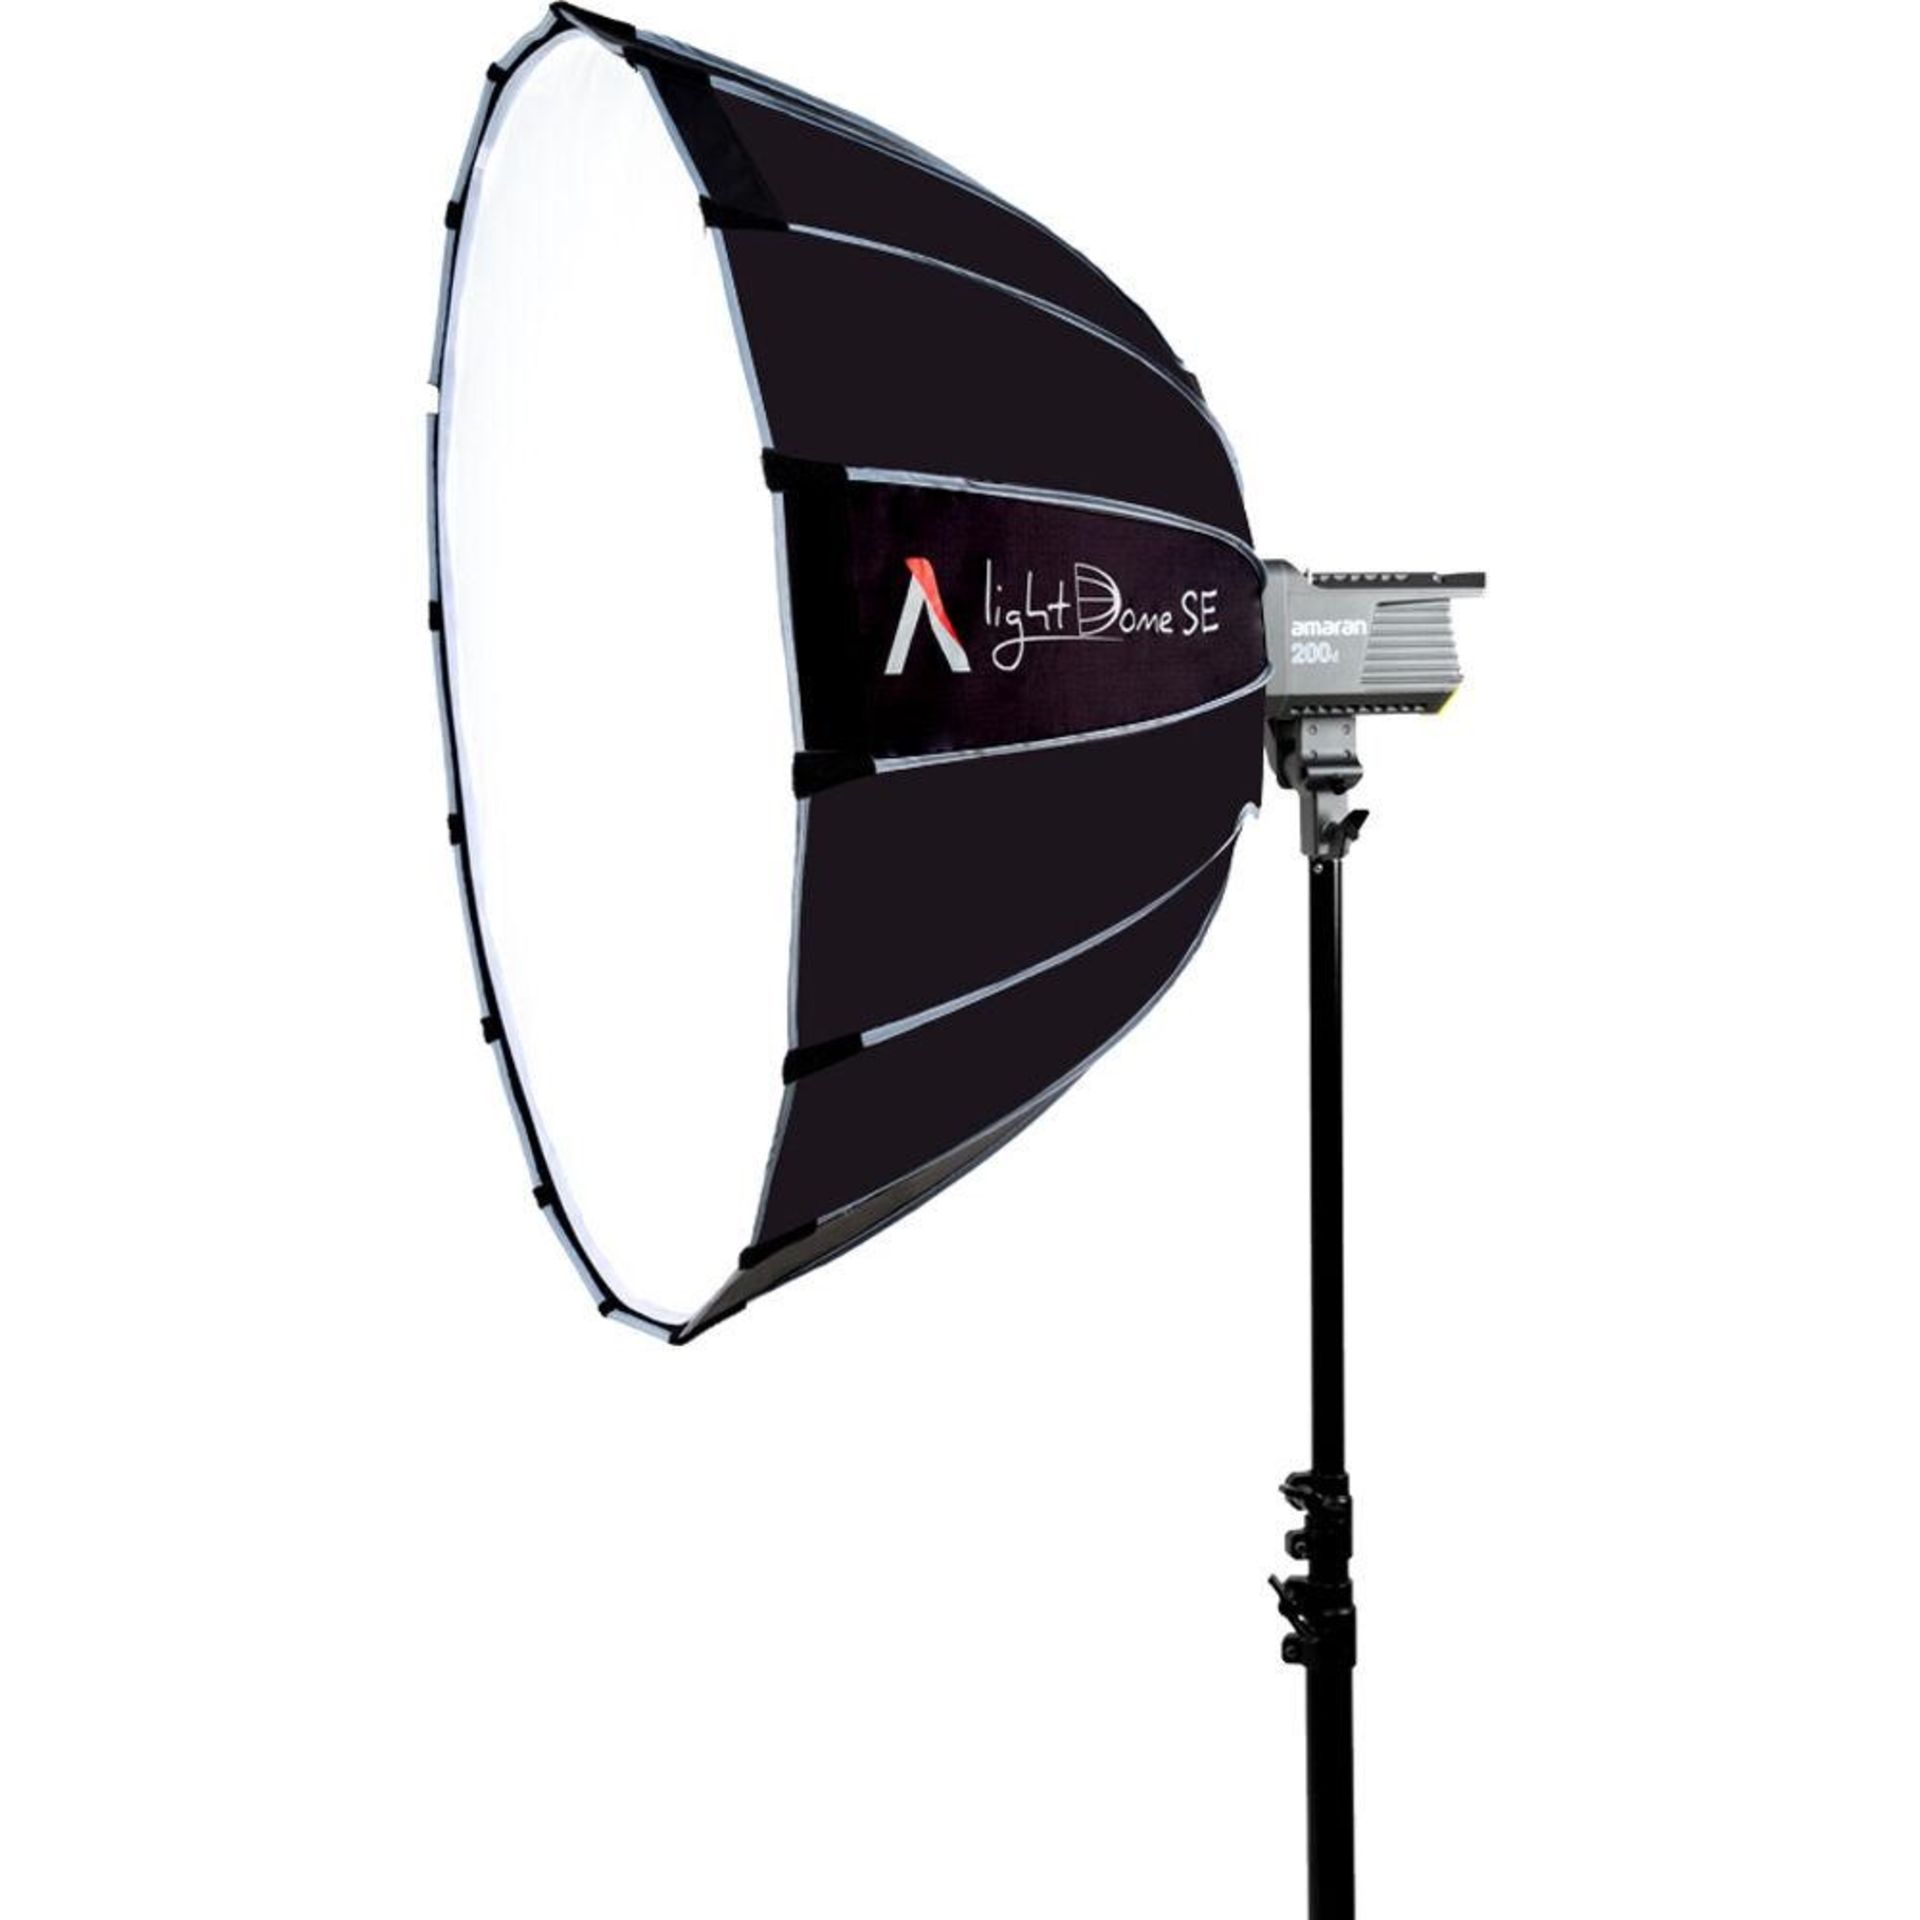 APATURE LIGHT DOME - IN A CARRY BAG